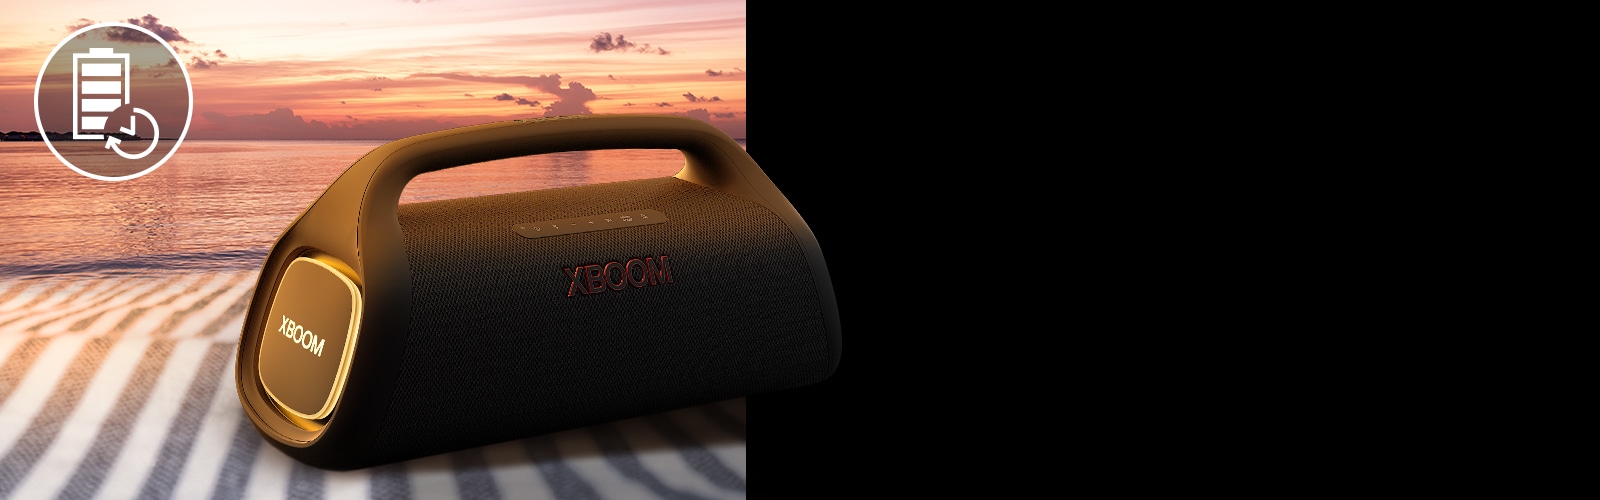 The speaker is placed on a beach towel. In front of the speaker, it shows sunset beach to illustrate that this speaker can be played longer.